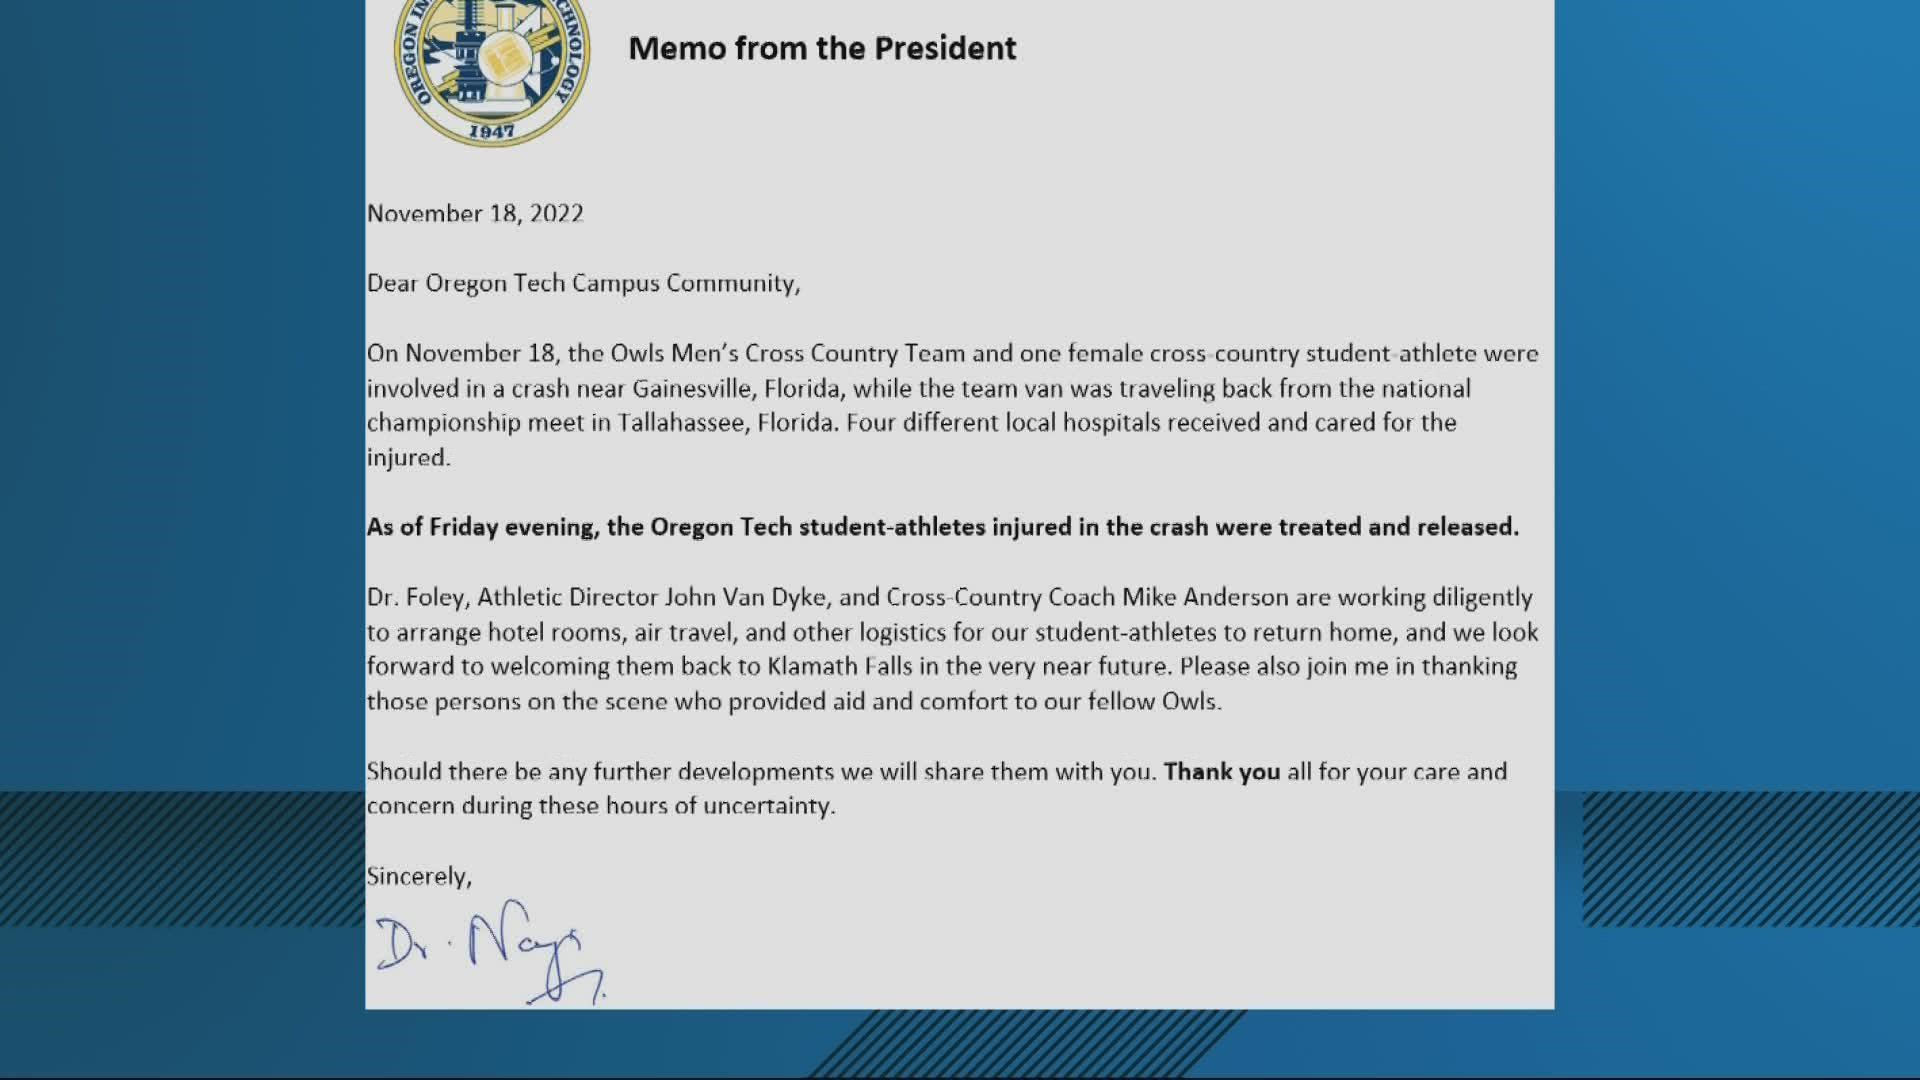 Student-athletes injured in the crash have been treated and released as of Friday evening, according to OIT's president.